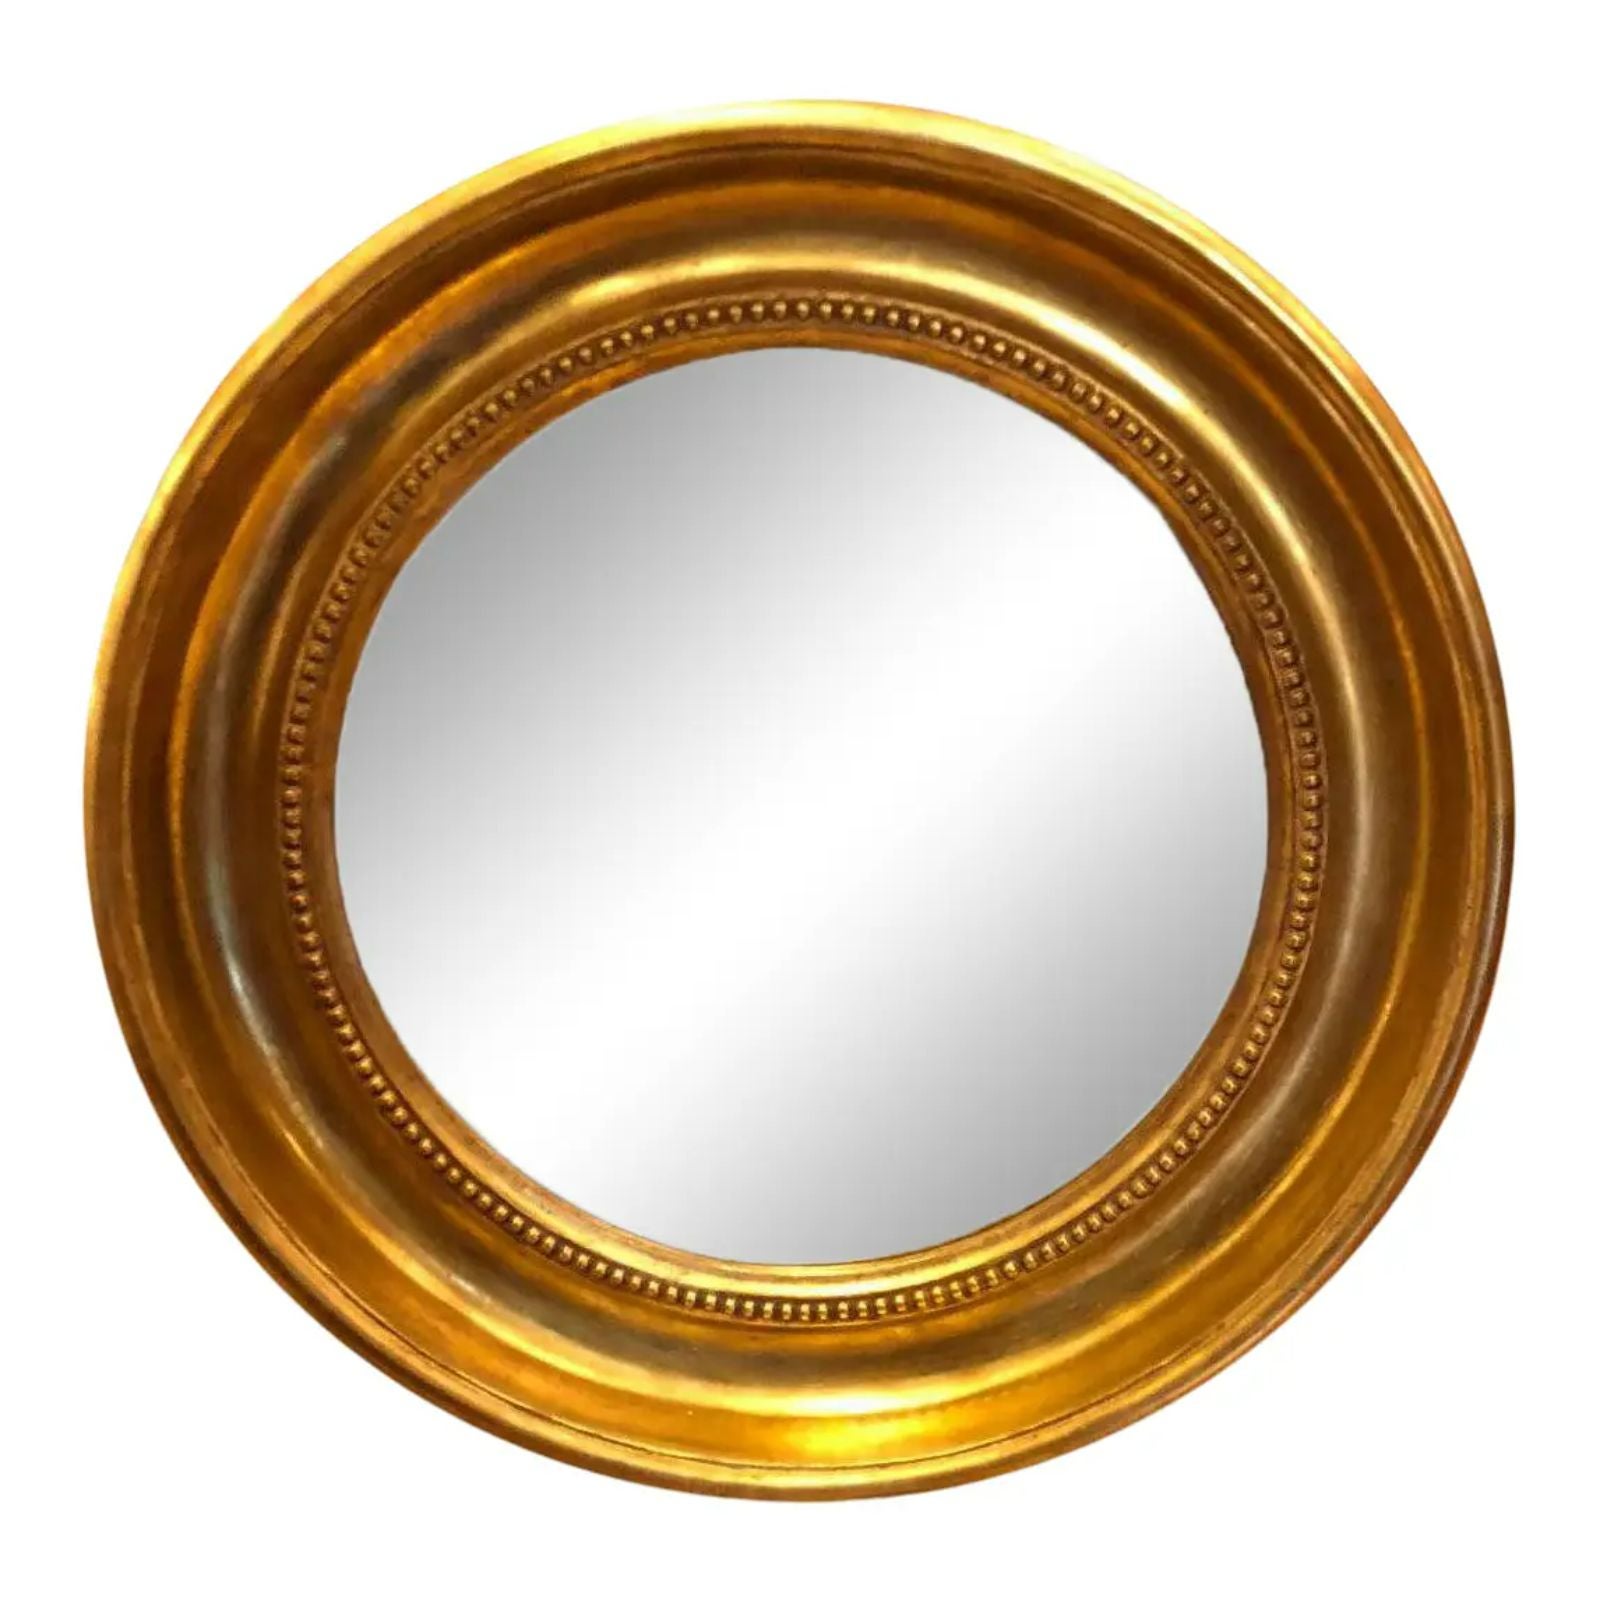 Round Empire Style Gold Mirror by Randy Esada Designs, 2010s For Sale